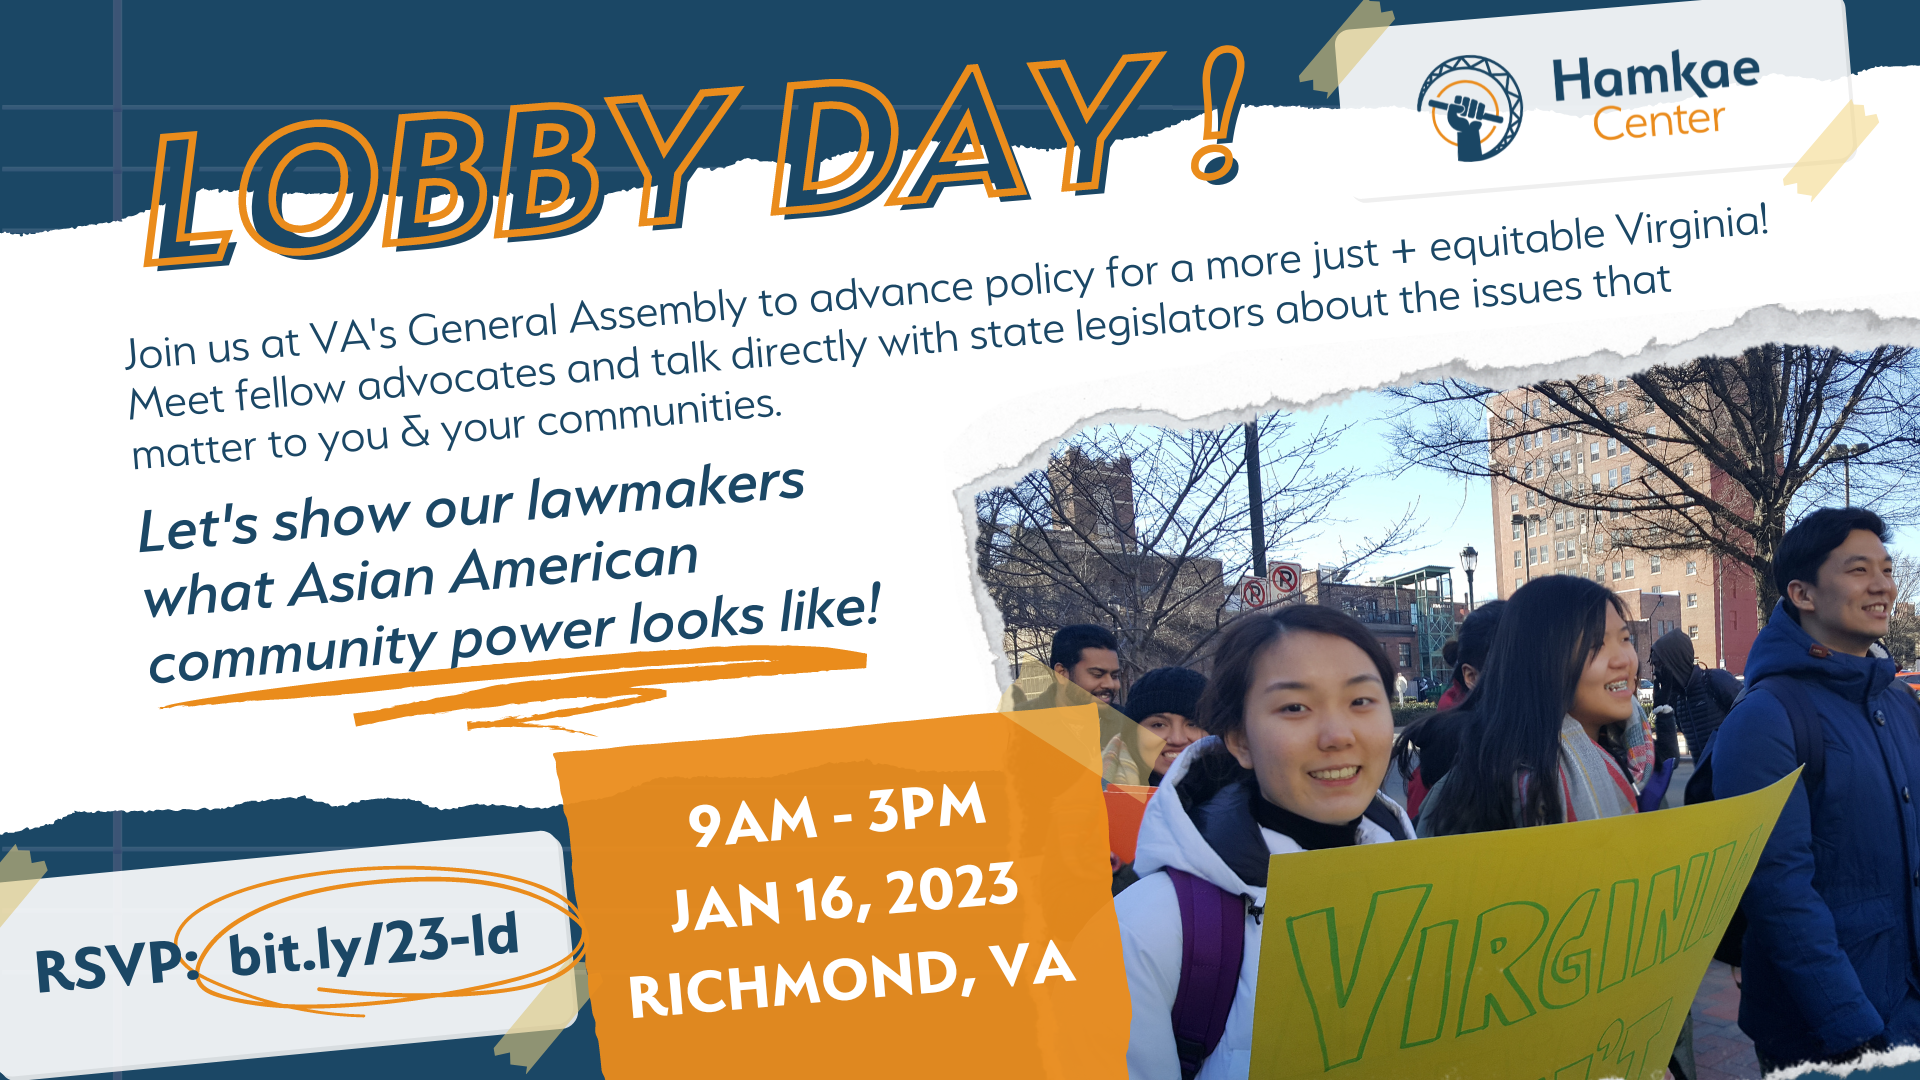 Lobby Day! Join us at VA's General Assembly to advance policy for a more just + equitable Virginia! Meet fellow advocates and talk directly with state legislators about the issues that matter to you & your communities. Let's show our lawmakers what Asian American community power looks like! 9am - 3pm Jan 16, 2023 Richmond, VA. RSVP: bit.ly/23-ld